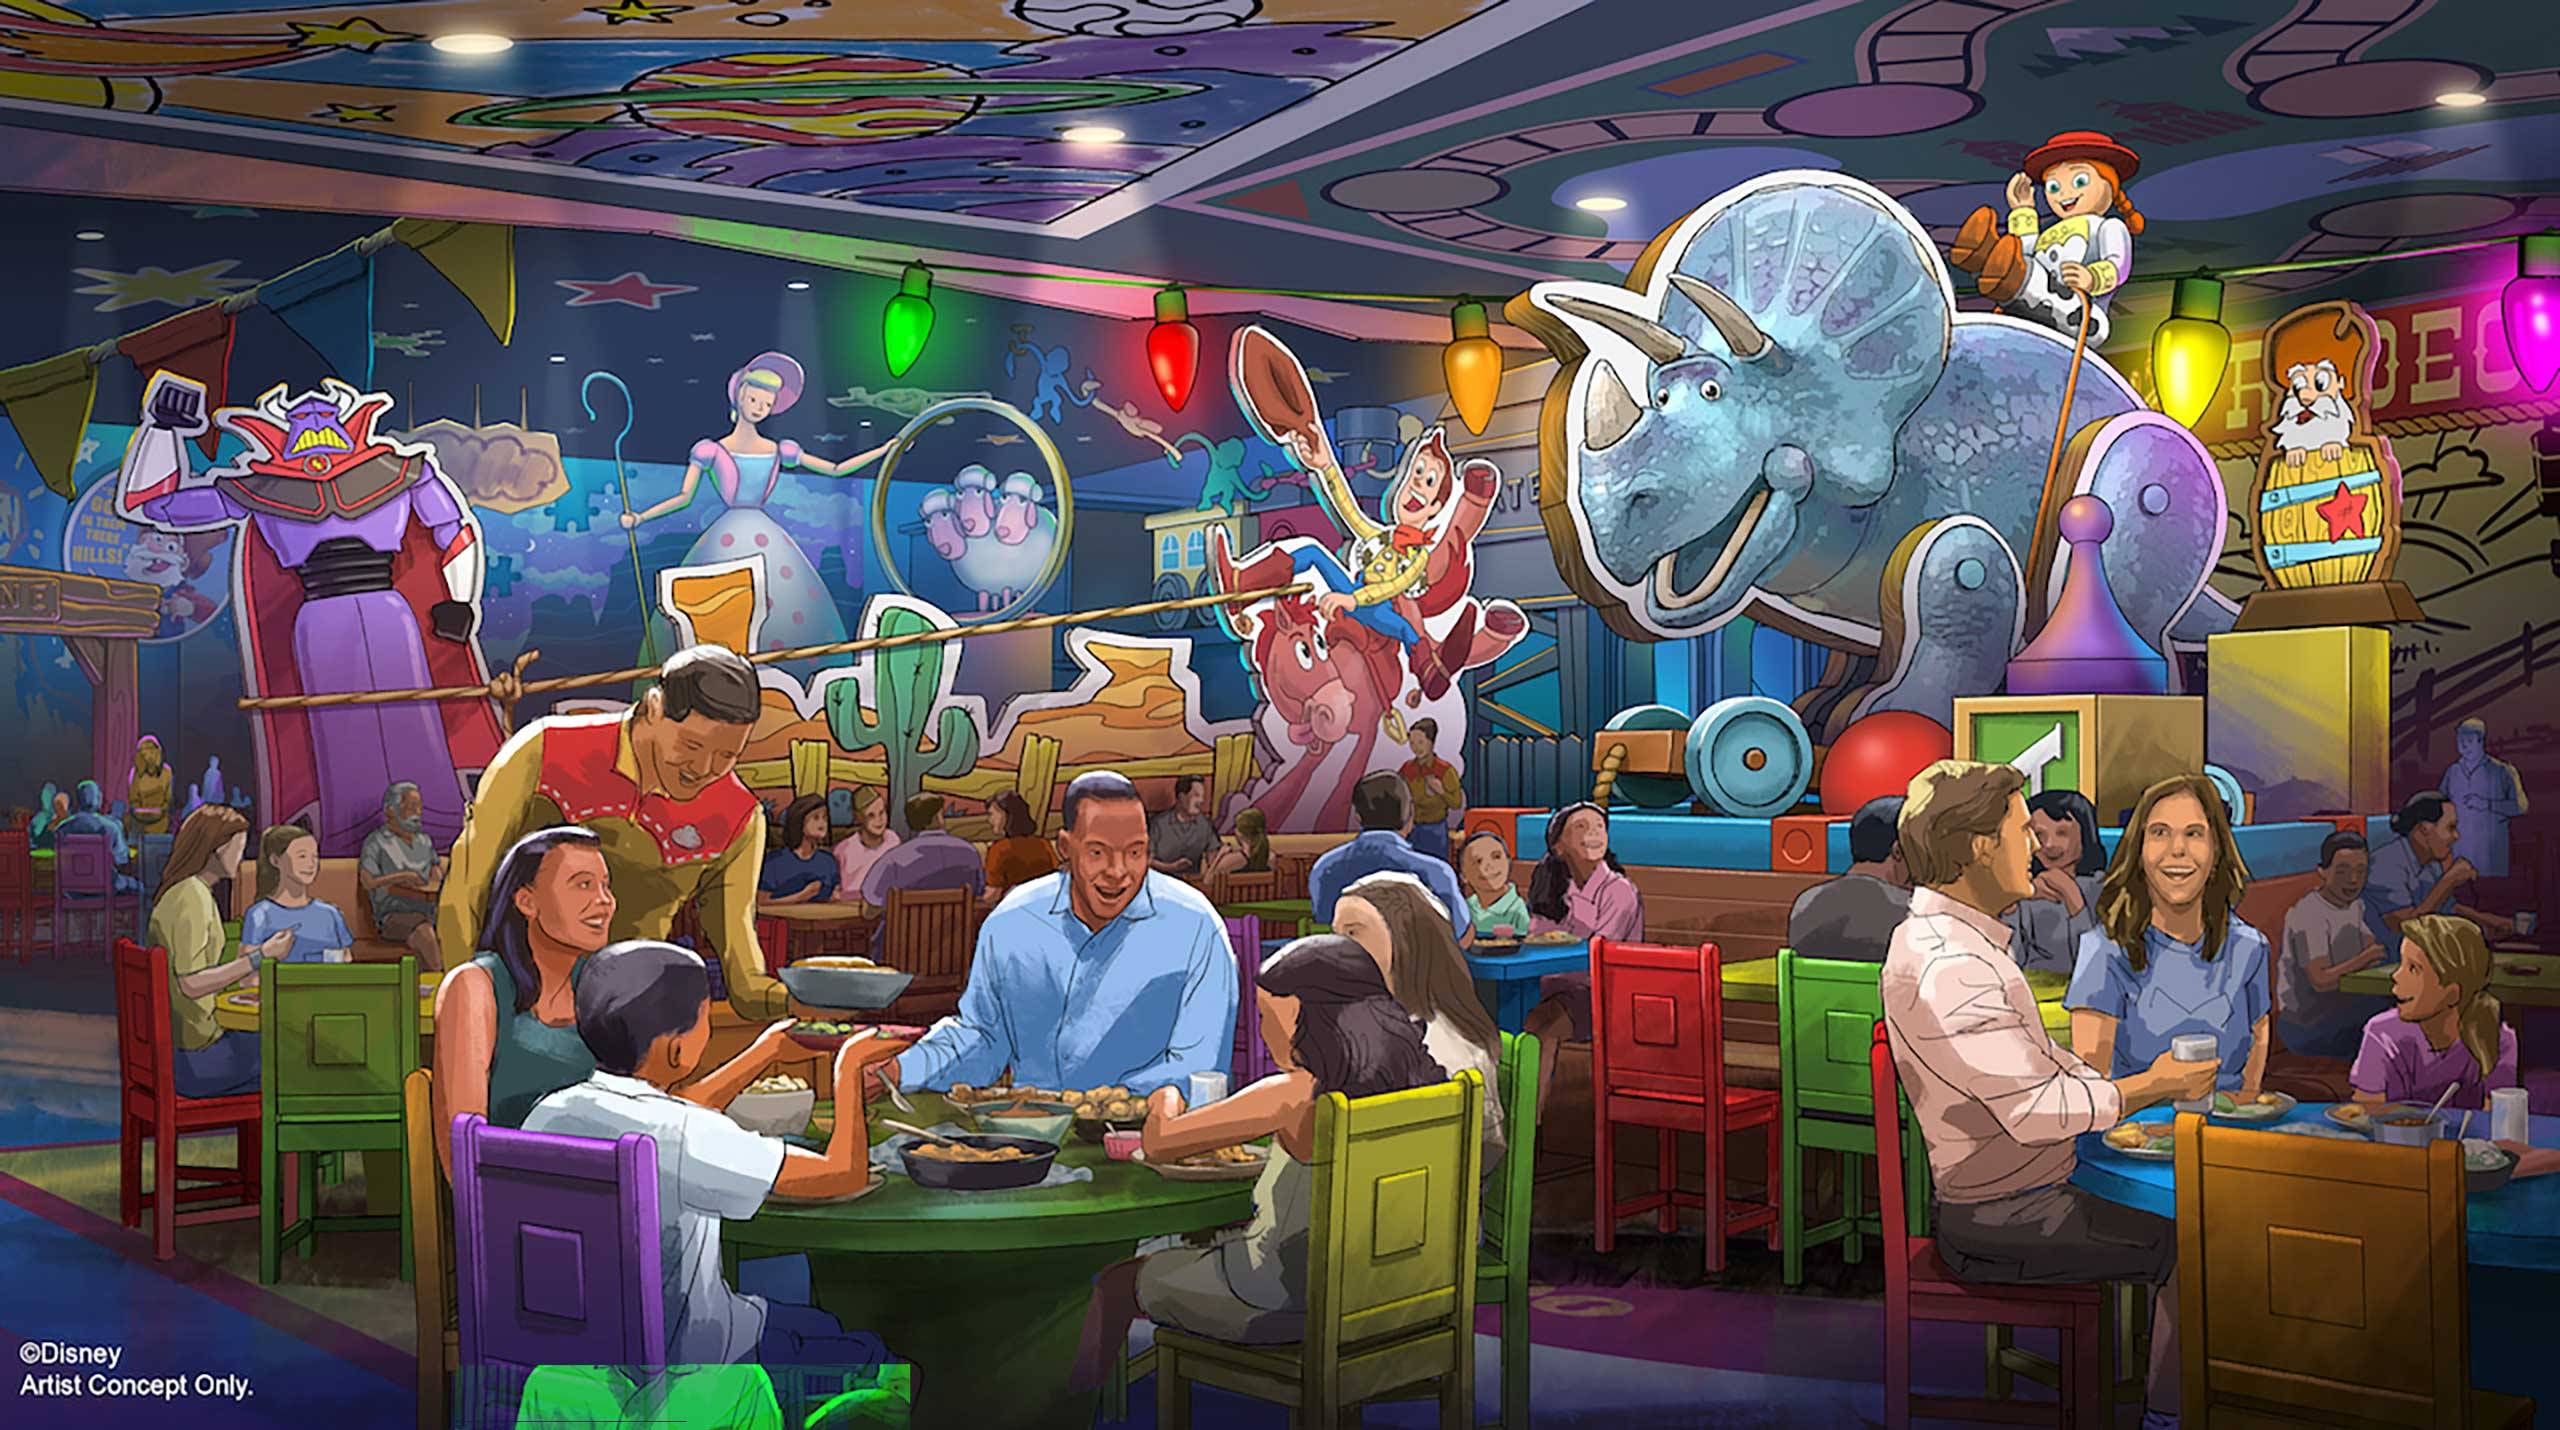 New Roundup Rodeo BBQ table service restaurant coming to Toy Story Land at Disney's Hollywood Studios